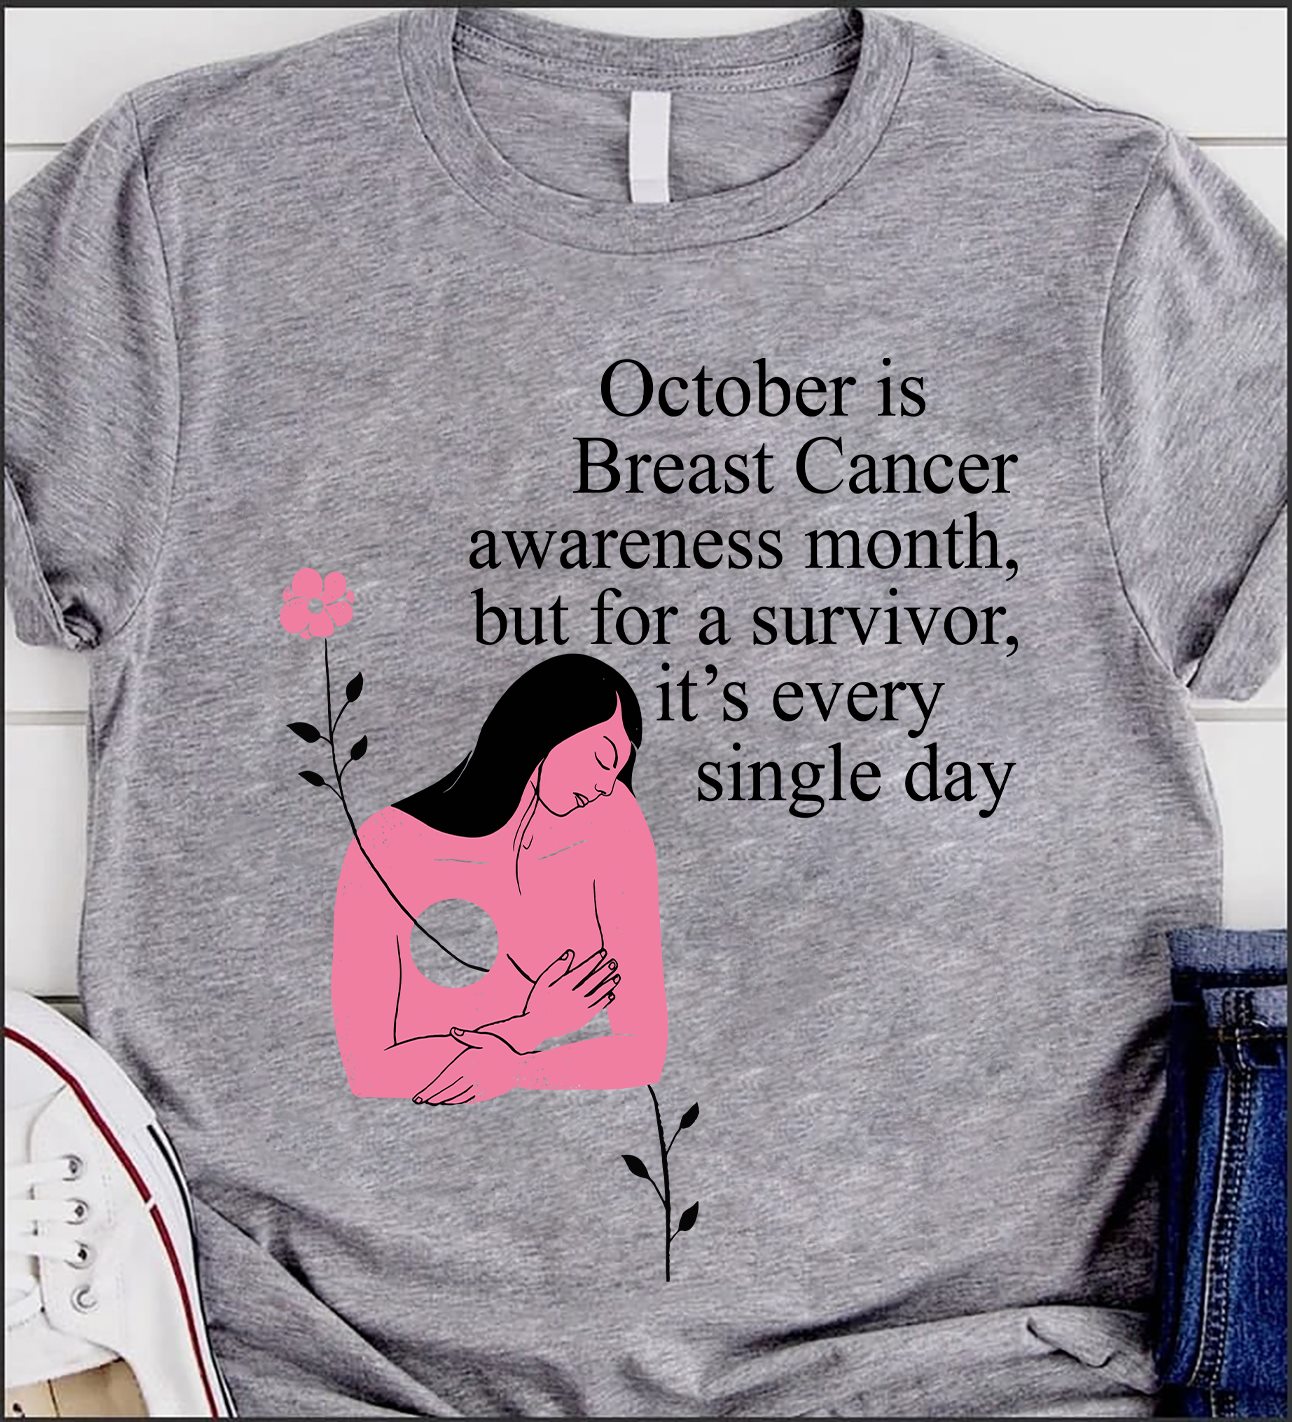 October is breast cancer awareness month, but for a survivor it's every single day - Breast cancer awareness